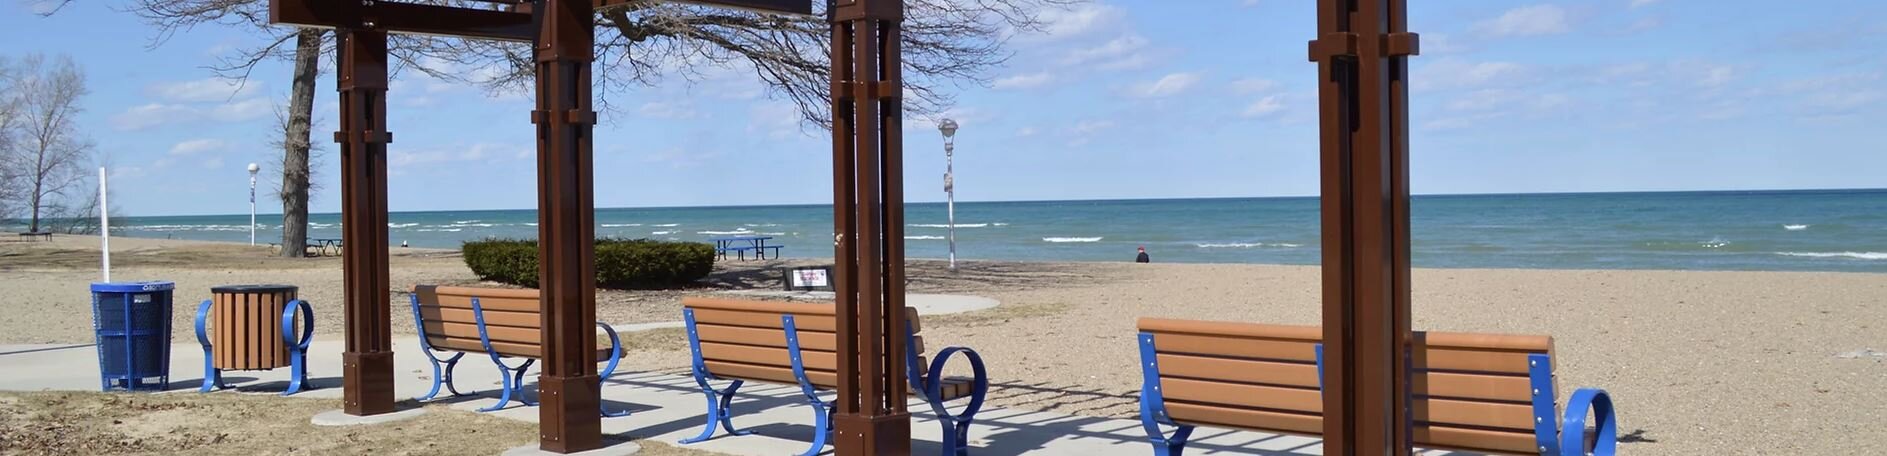 Lakeside Beach, Port Huron. Photo: Supplied / Port Huron Parks and Recreation